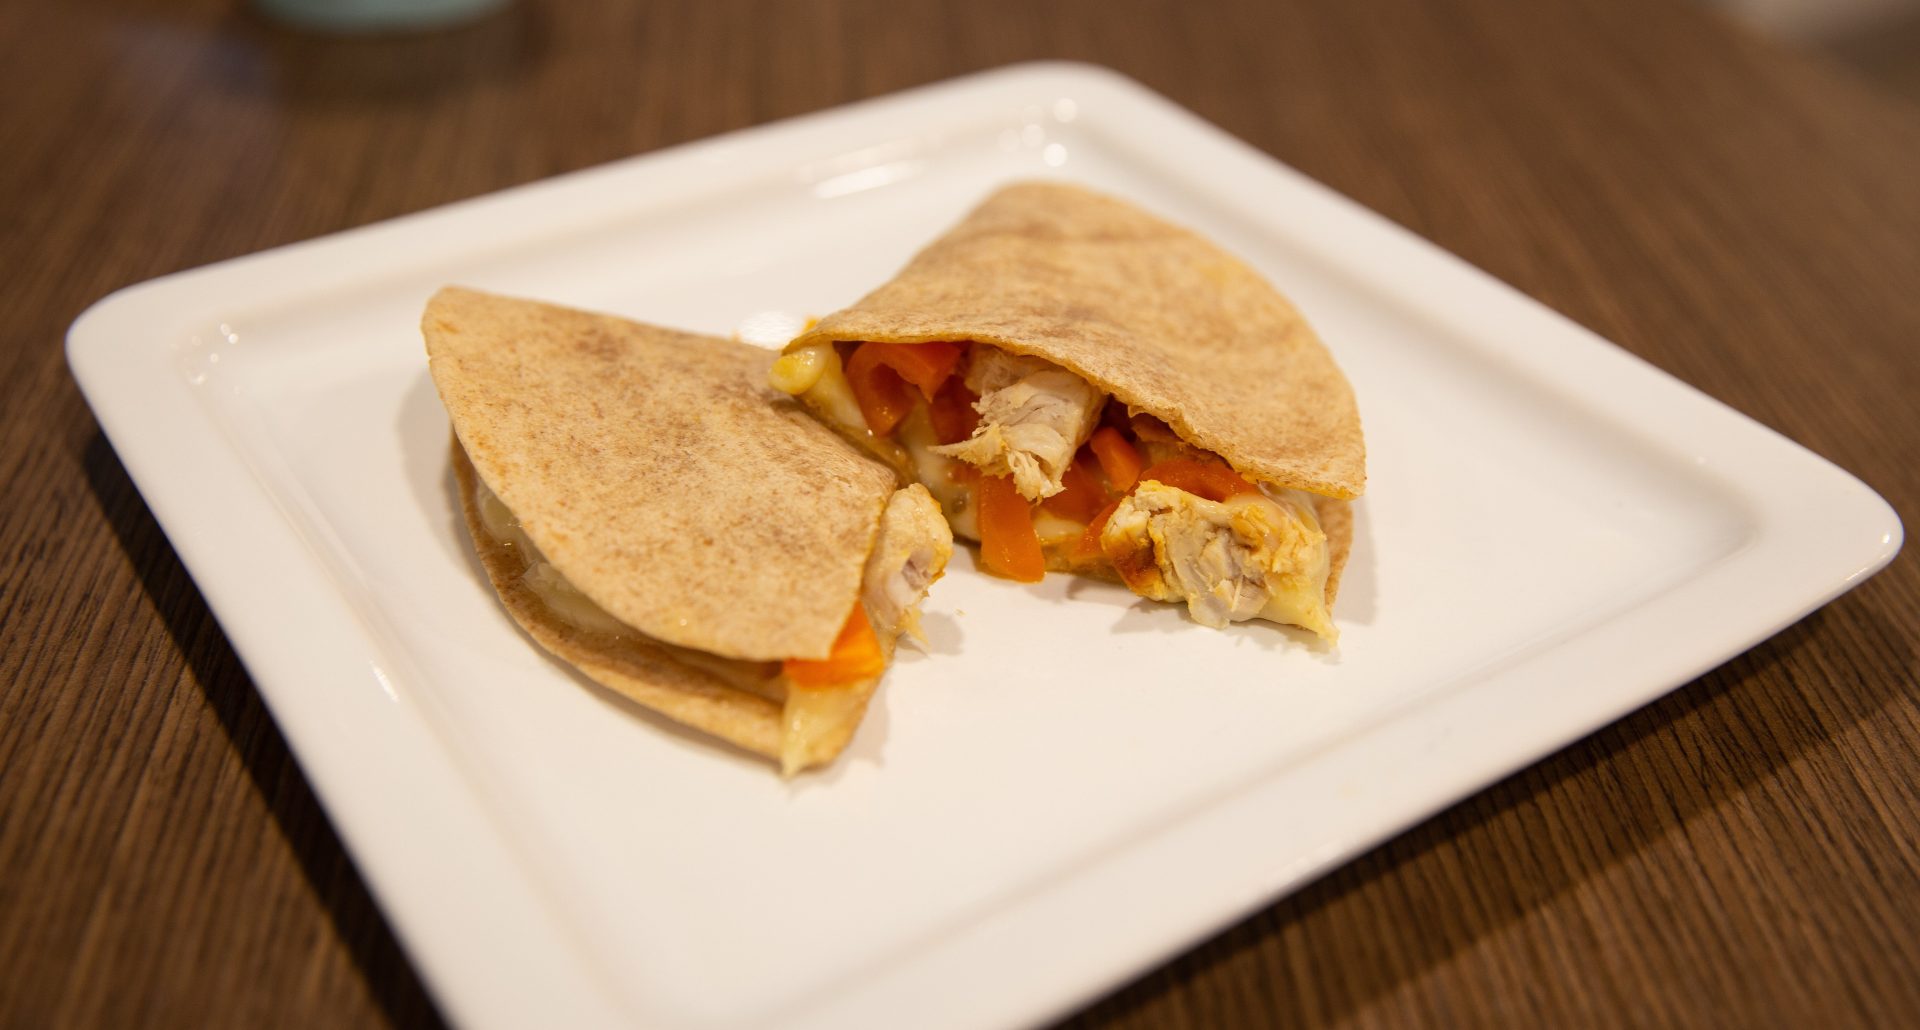 Cooked and plated chicken quesadilla.